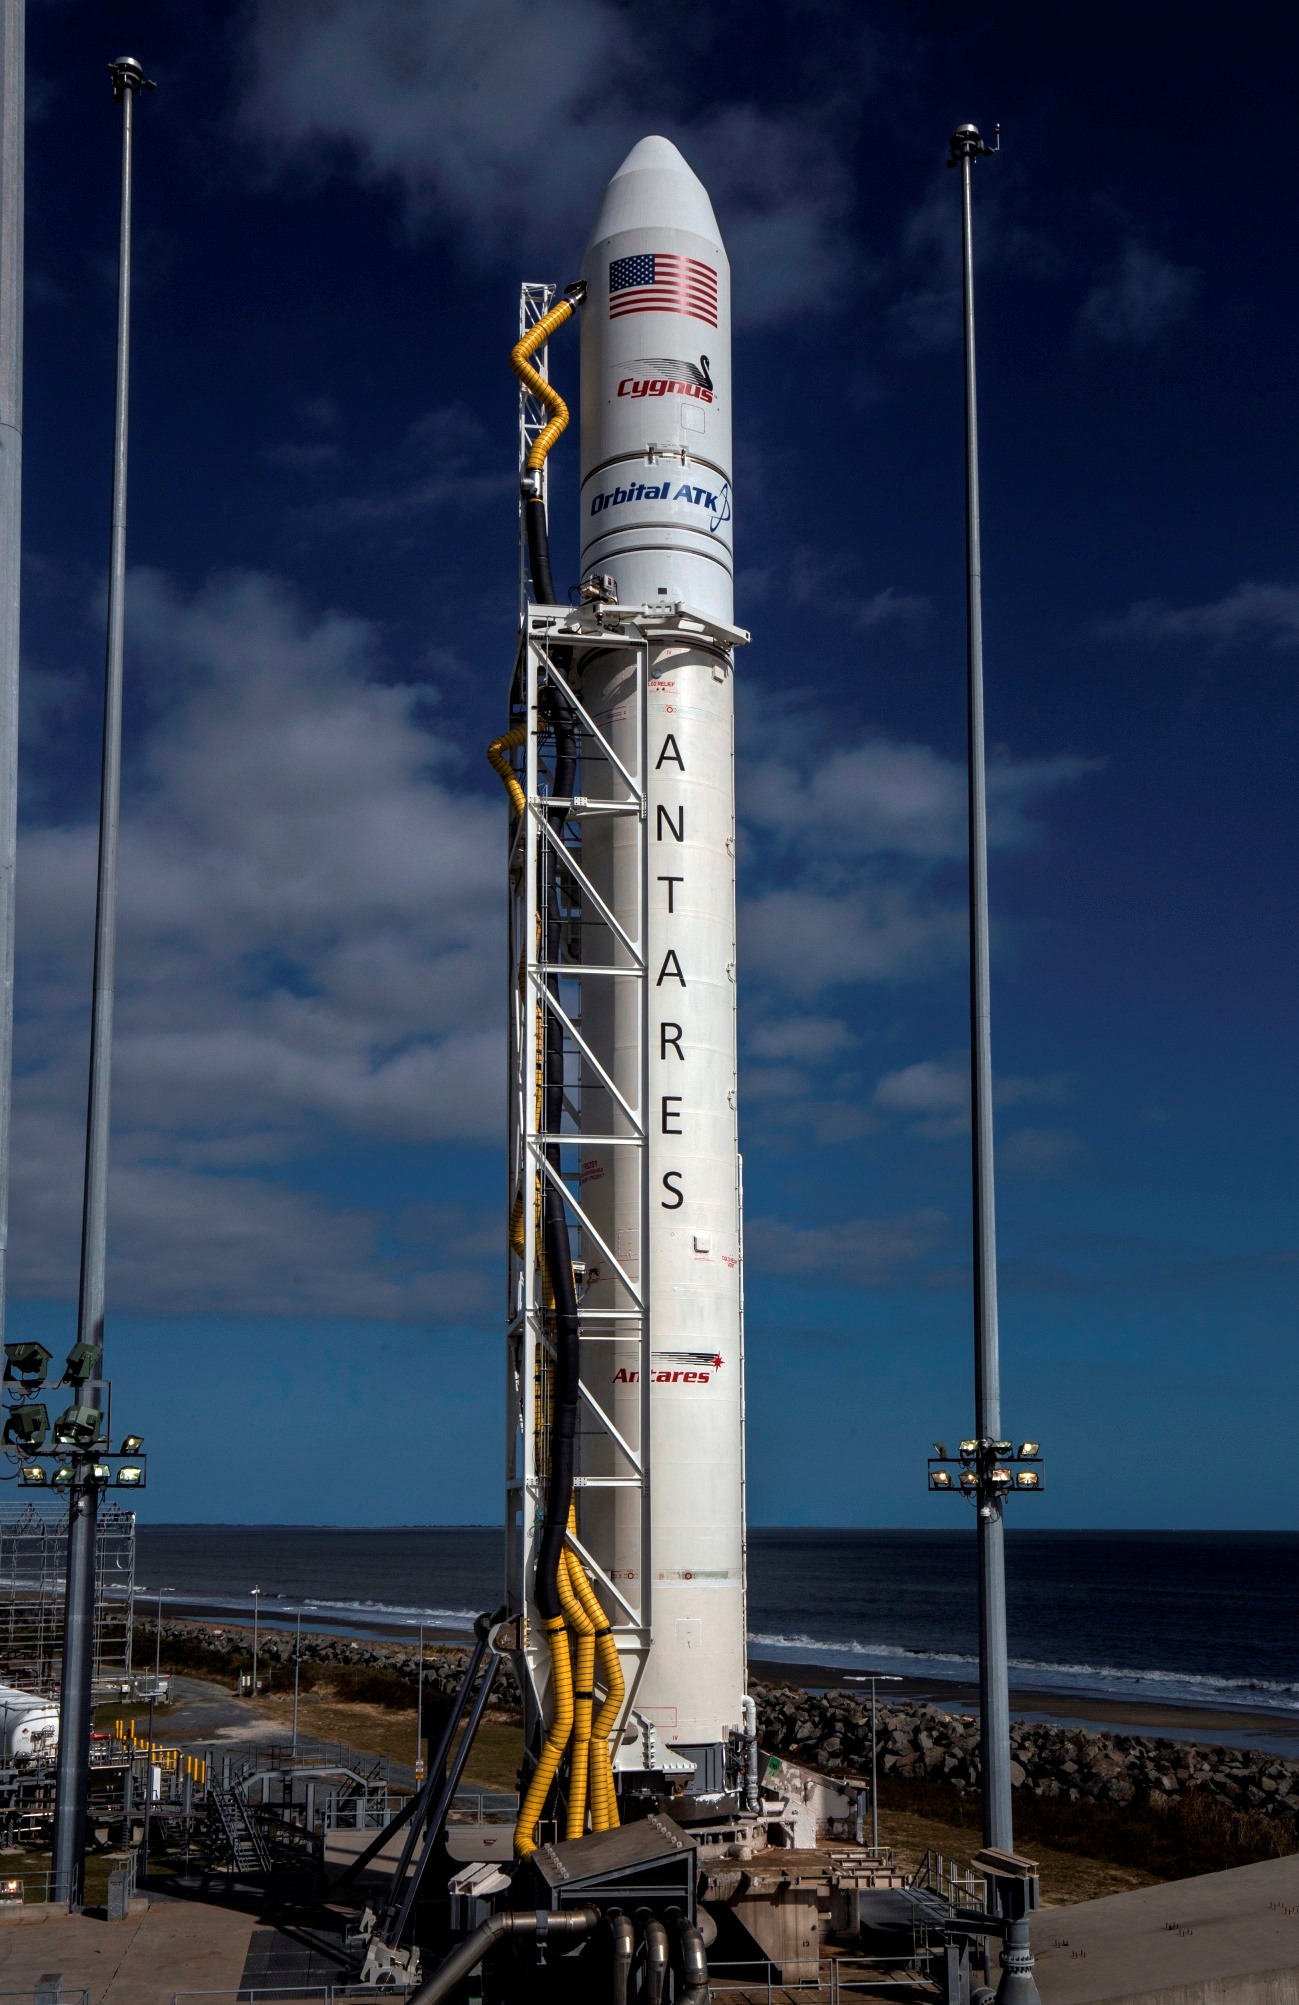 Antares booster on launch pad. Courtesy of Orbital ATK. Used with permission.